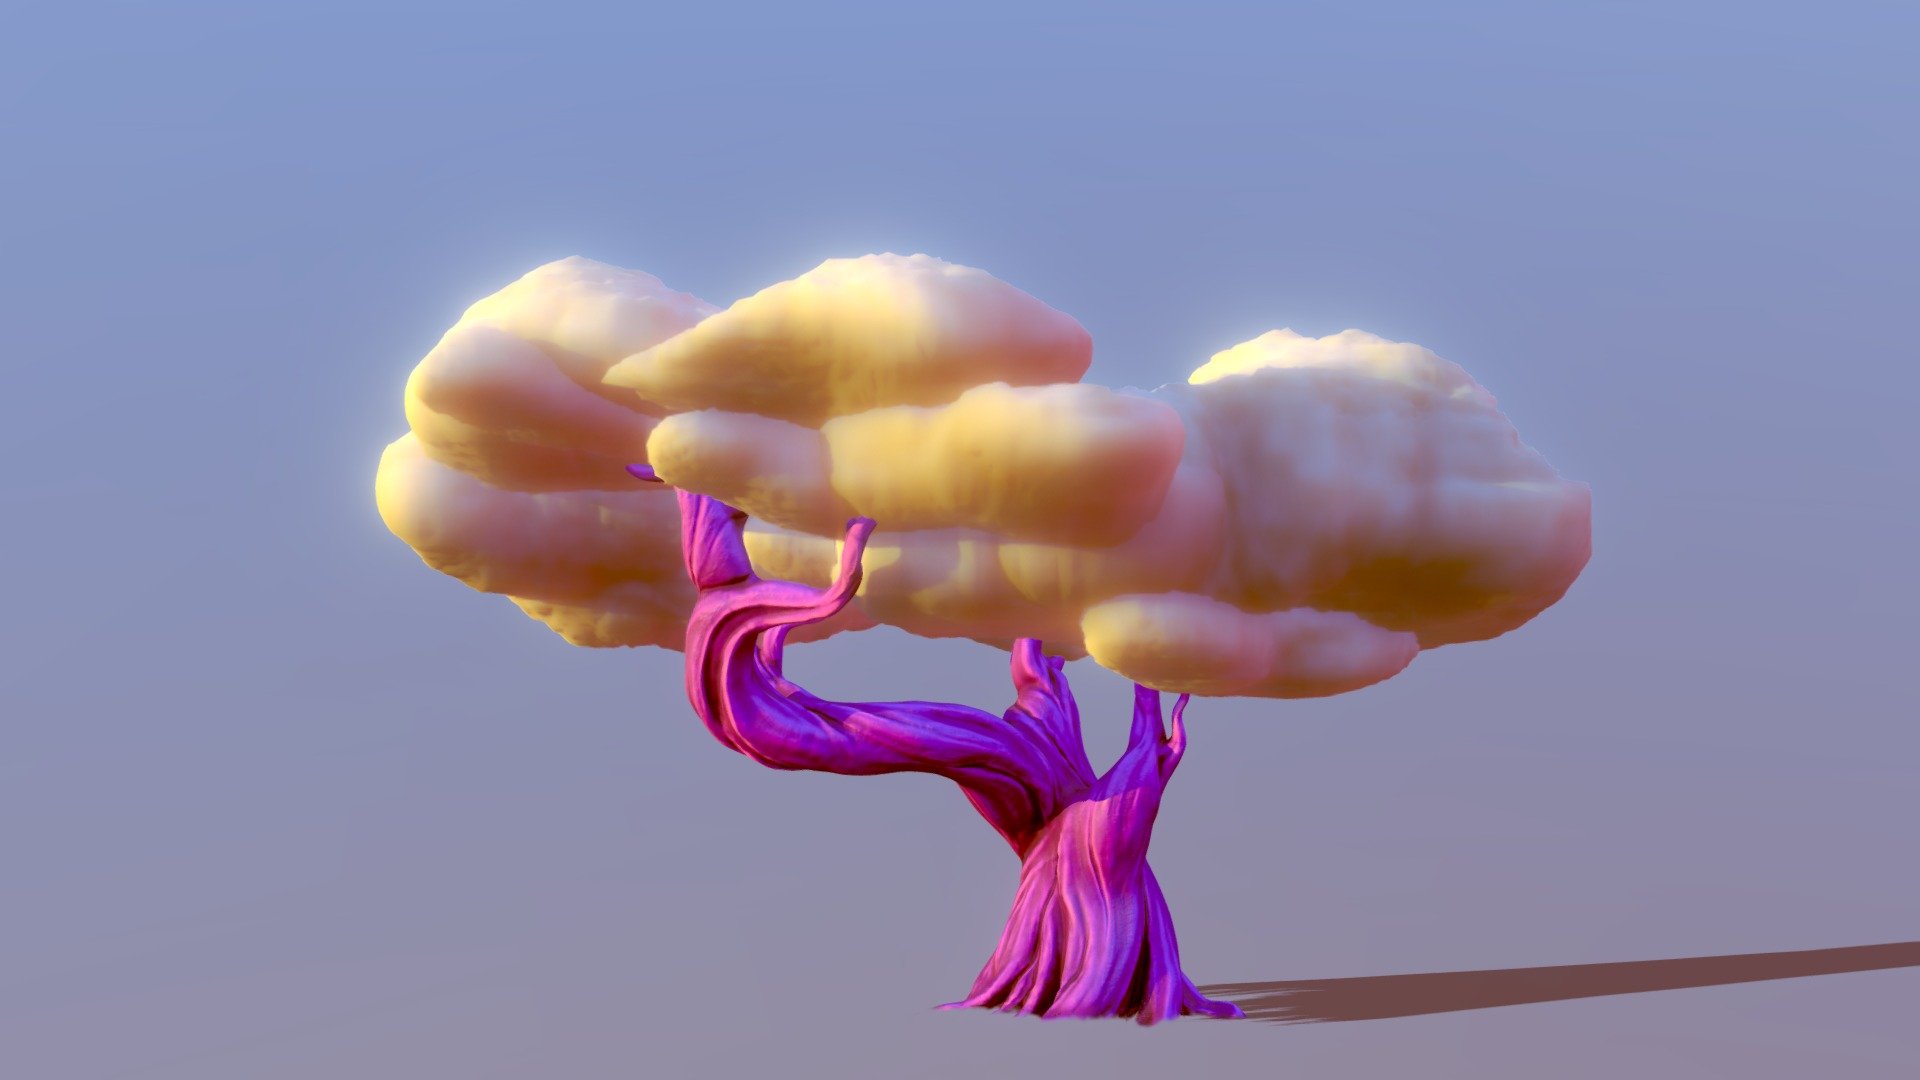 I love sunsets. I guess many peoples love it! It inspired me to create interesting fair tale tree. Cloud tree! I called it Cloudsai. Something like mixed between bonsai and clouds 3d model